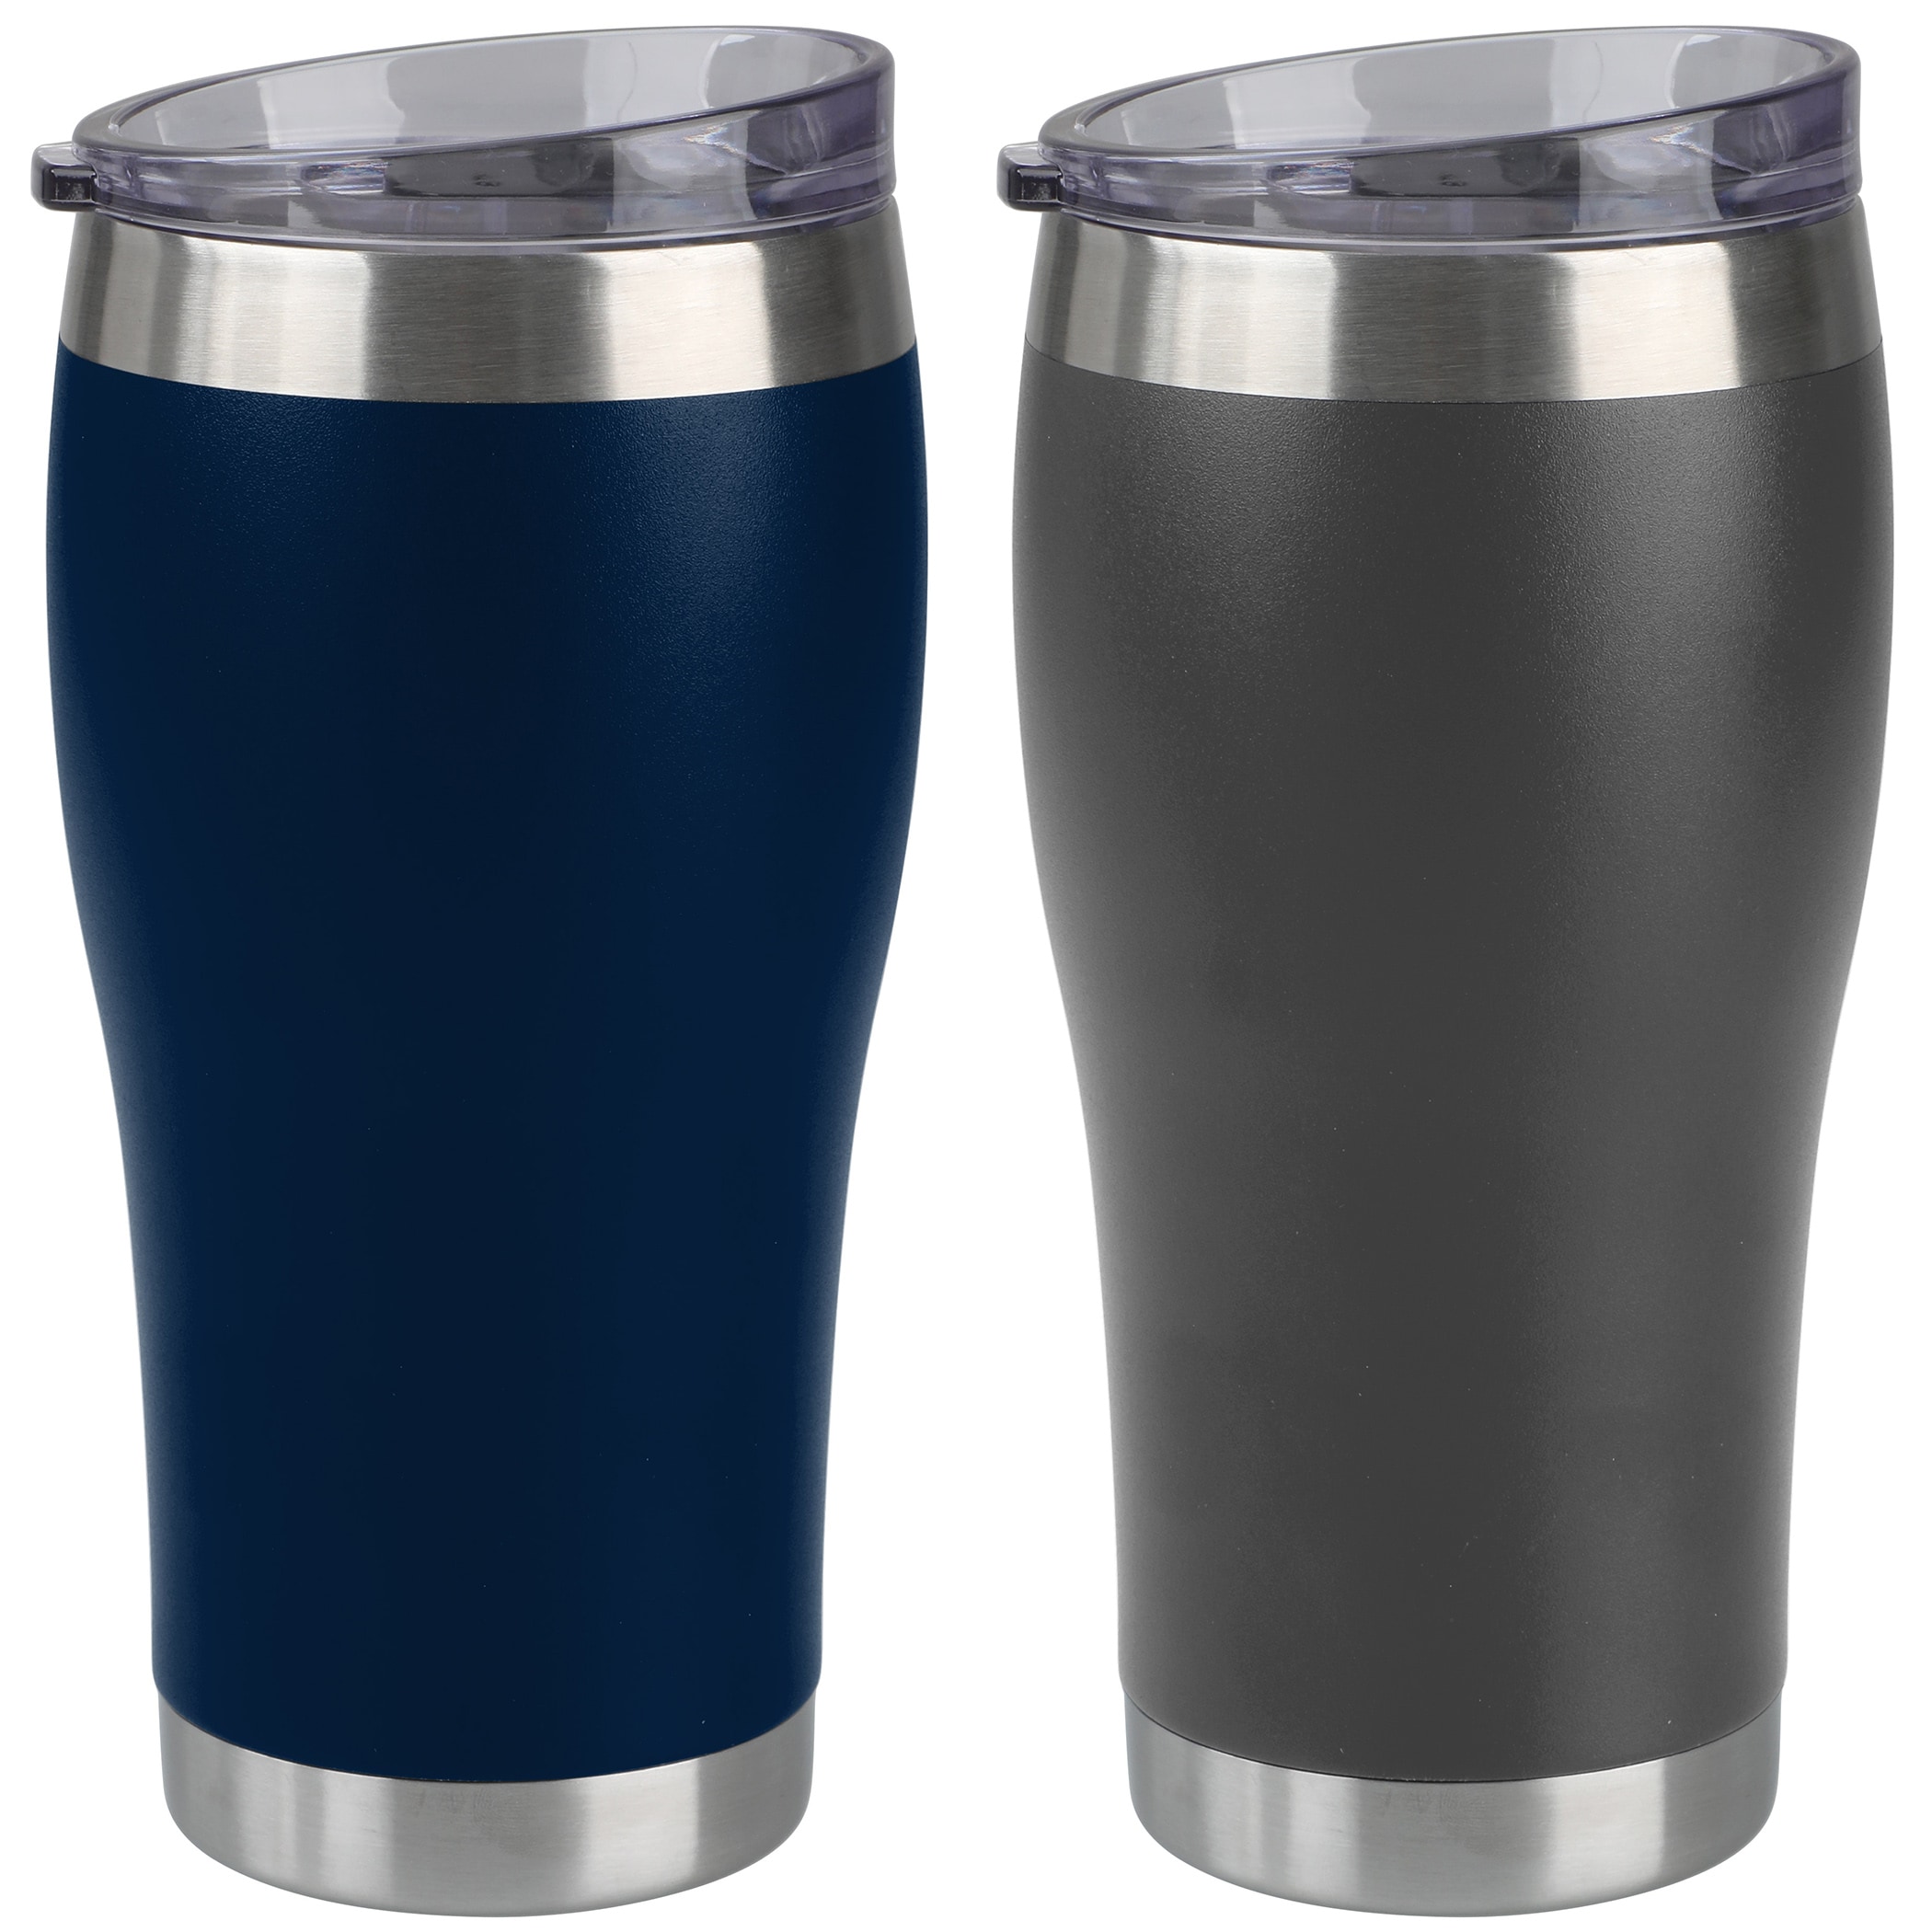 Kobalt 20-fl oz Stainless Steel Insulated Tumbler in the Water